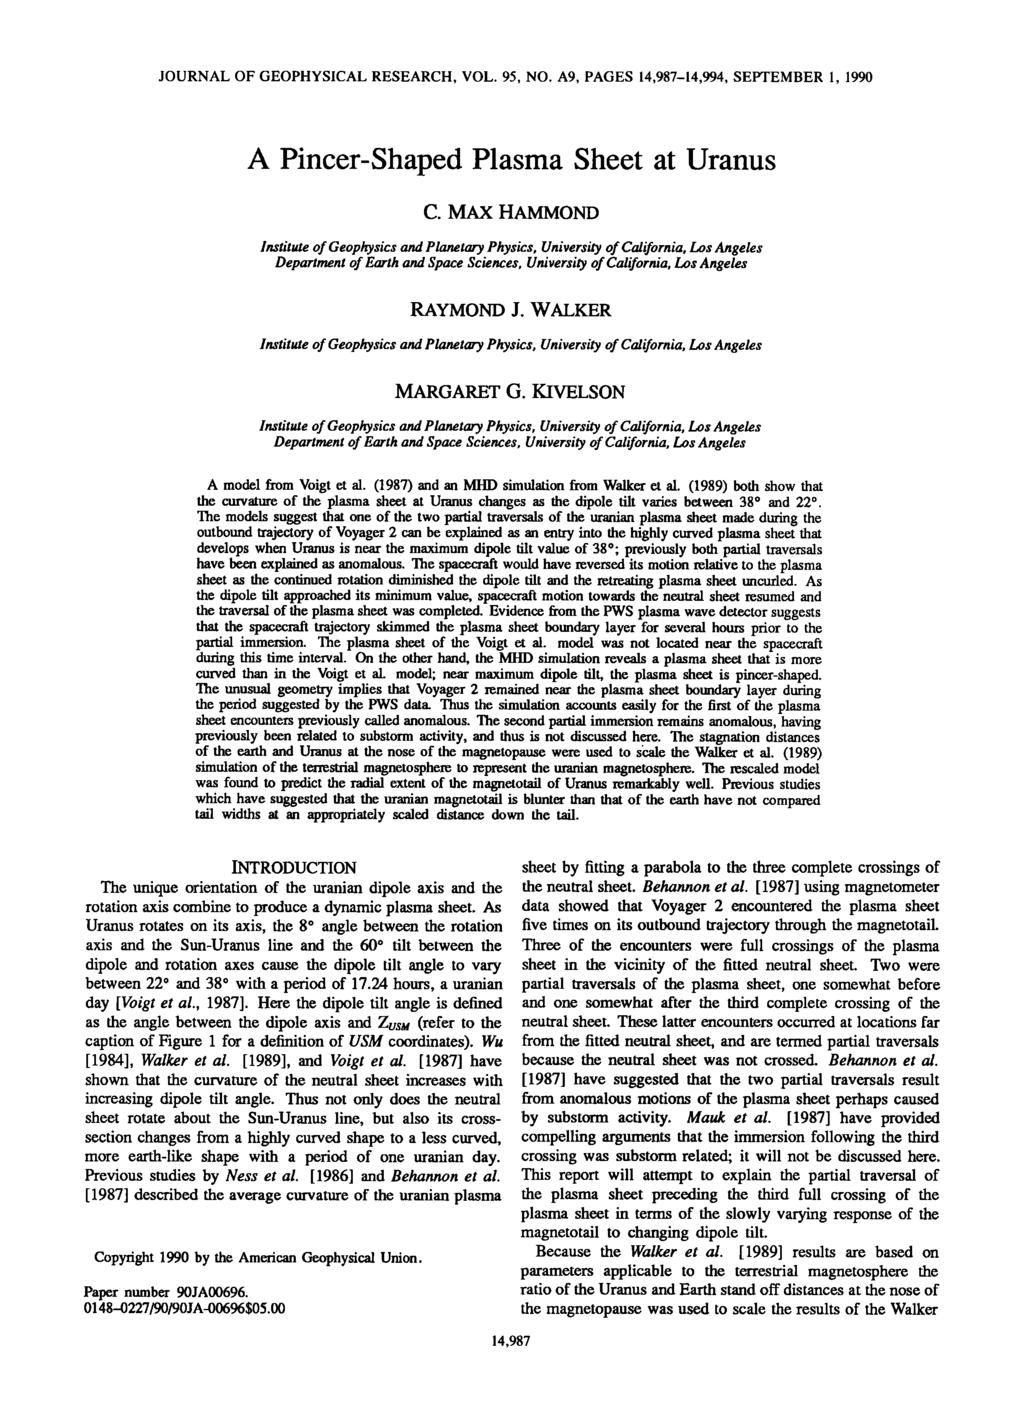 JOURNAL OF GEOPHYSICAL RESEARCH, VOL. 95, NO. A9, PAGES 14,987-14,994, SEPTEMBER 1, 1990 A Pincer-Shaped Plasma Sheet at Uranus C.